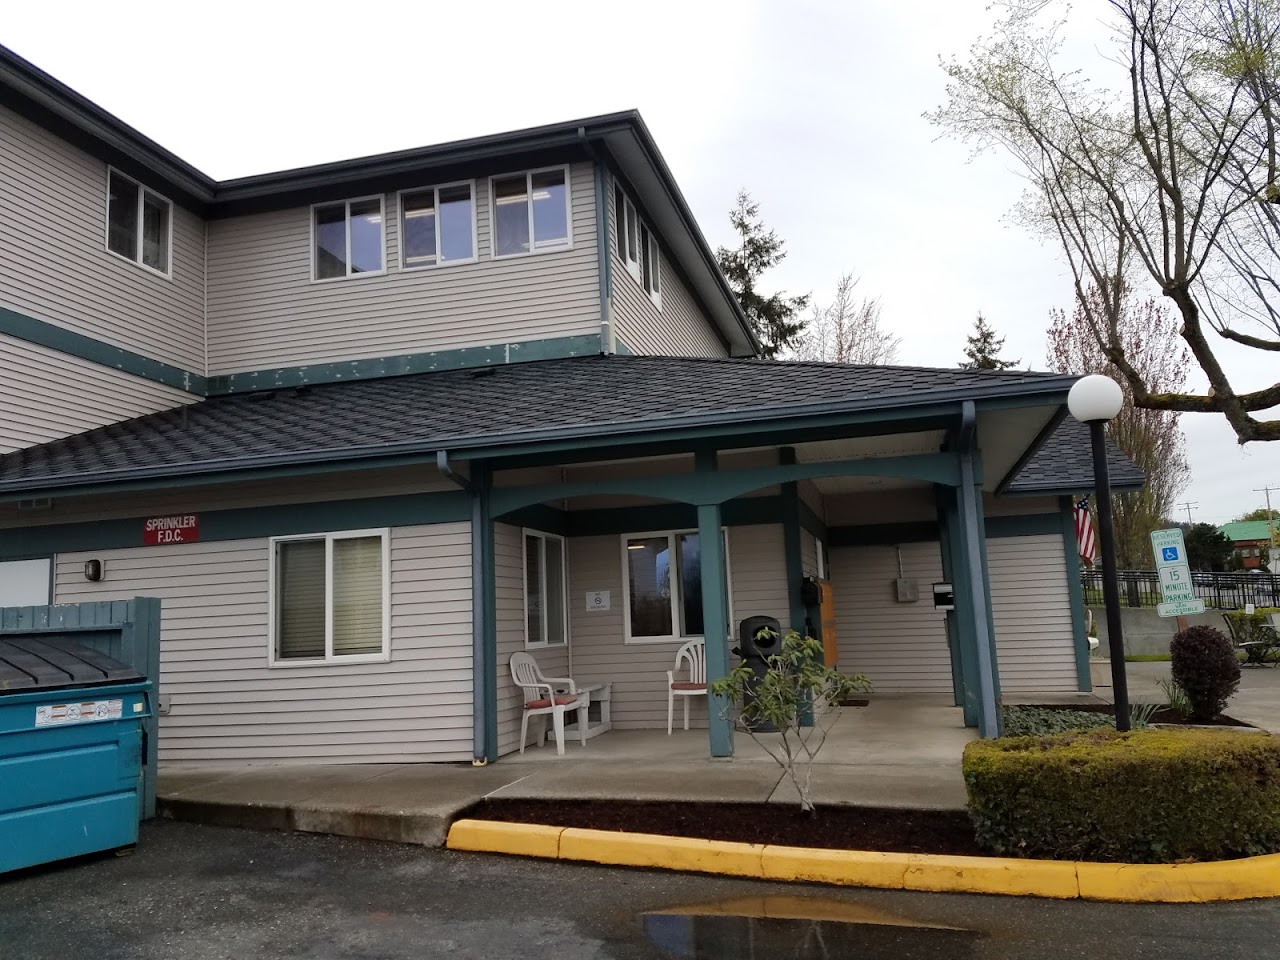 Photo of SILVERWOOD. Affordable housing located at 1103 - 29TH ST ANACORTES, WA 98221